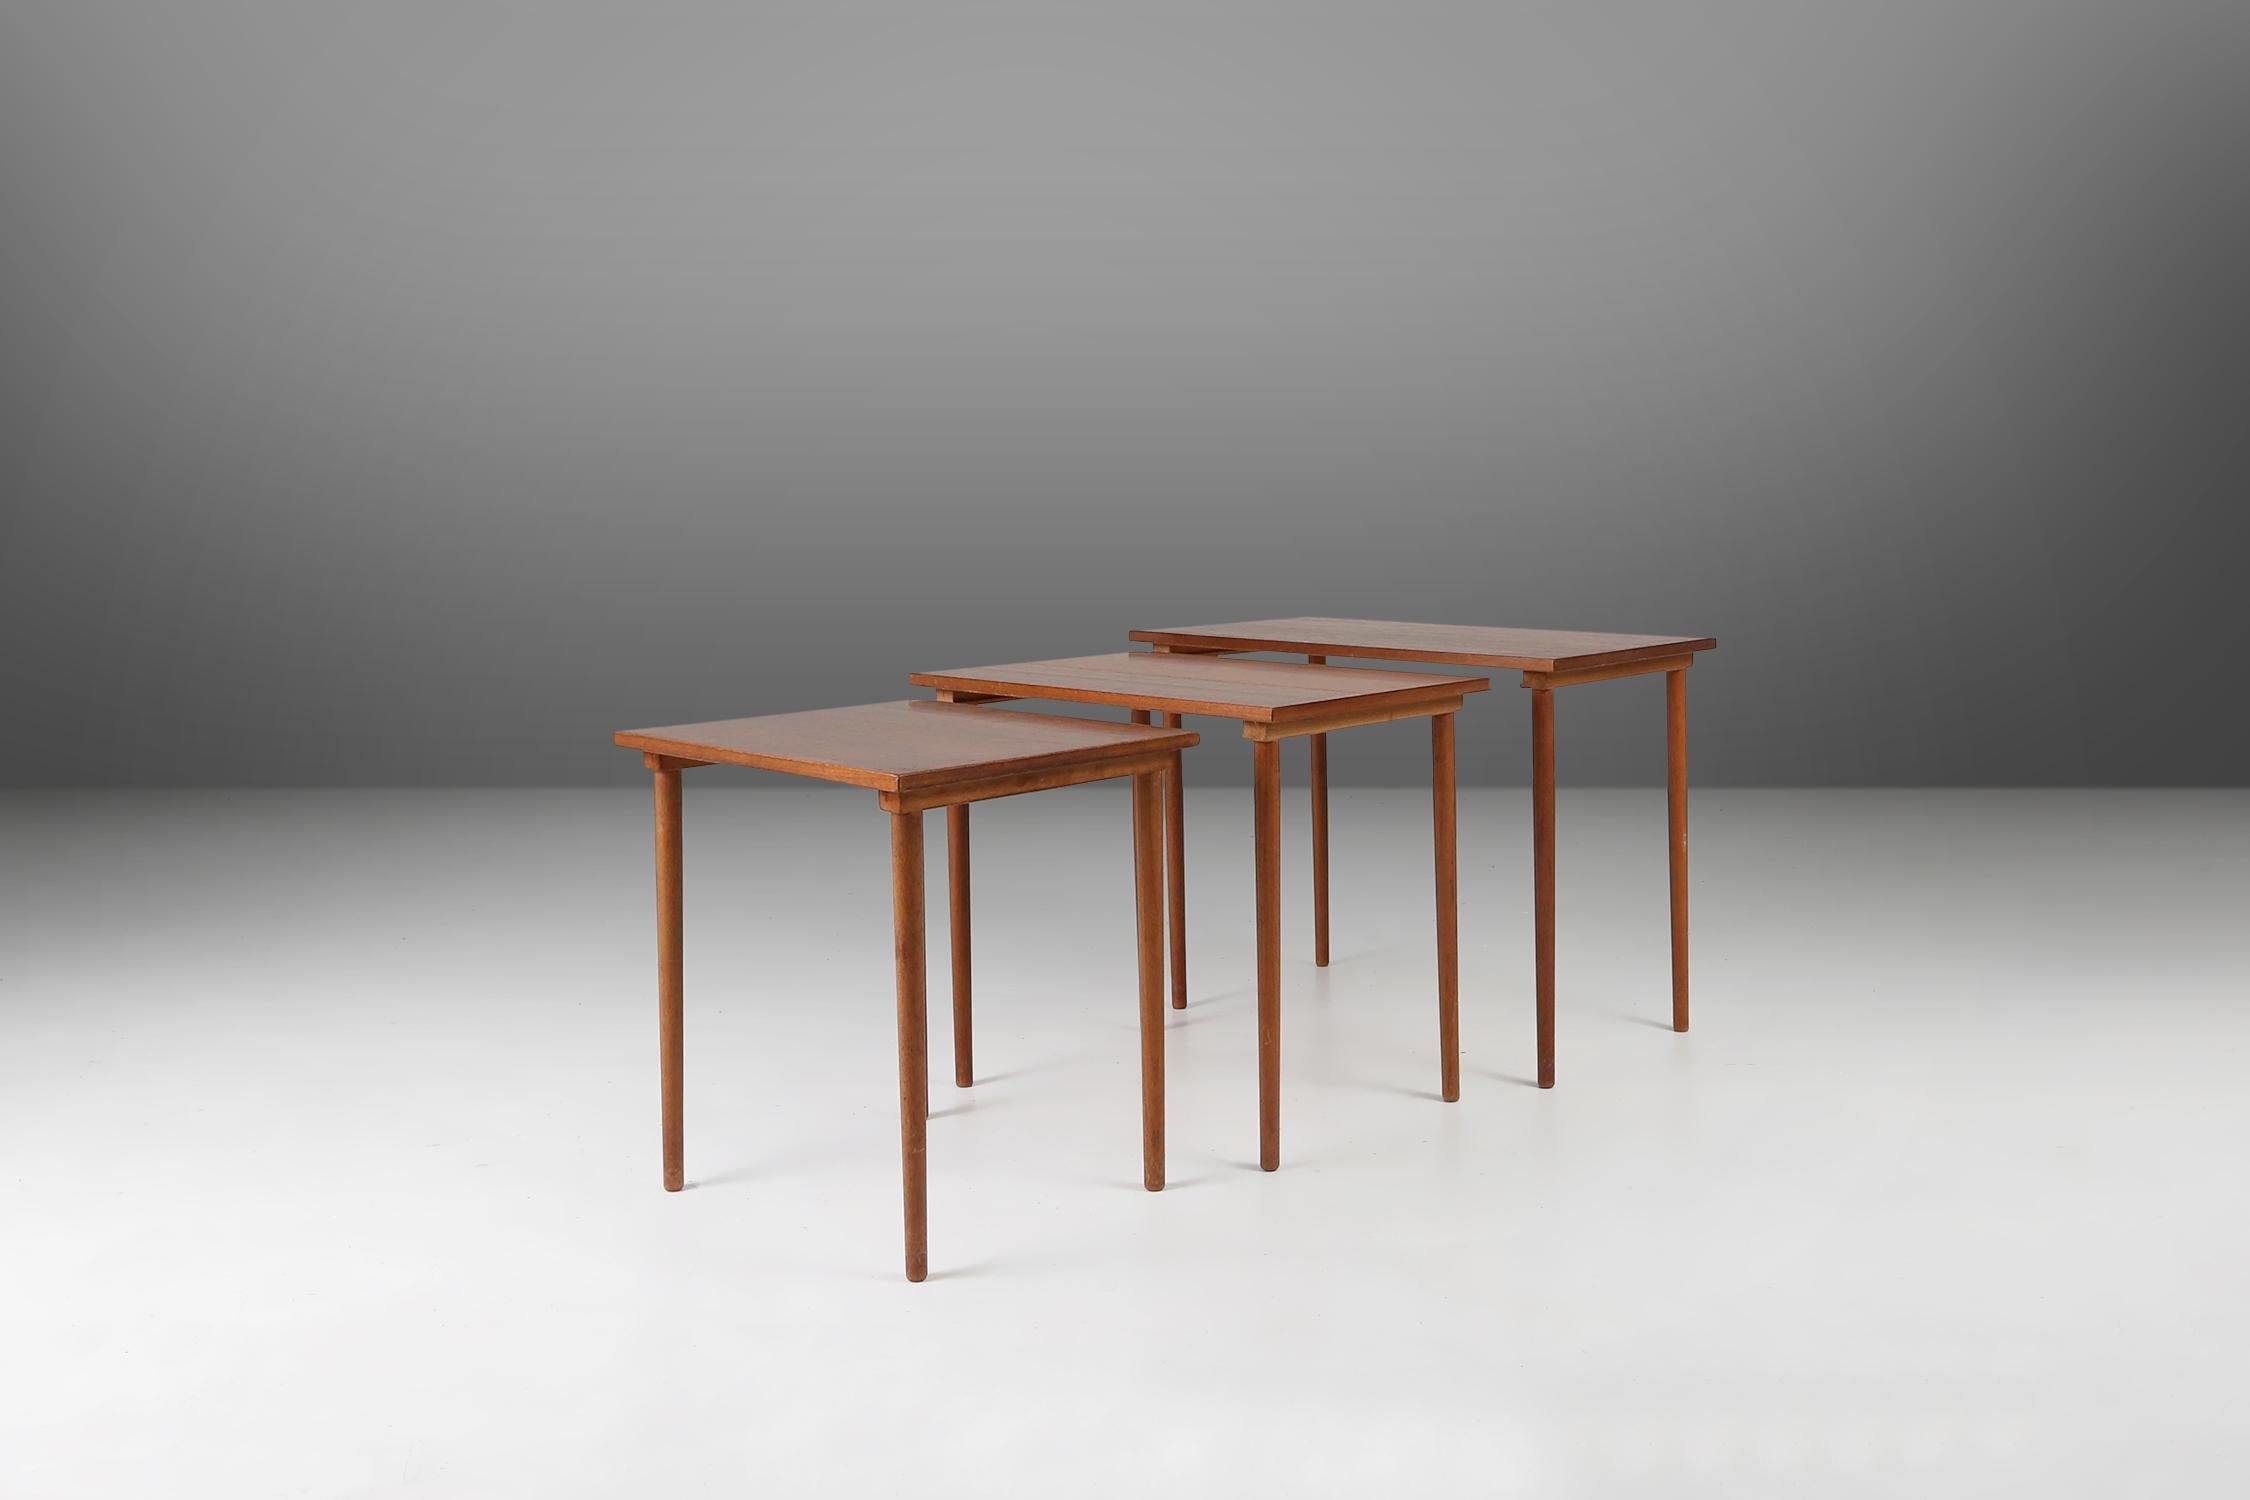 A set of 3 beautifully designed teak wood Scandinavian design nesting tables from Denmark. This set is a perfect example of Scandinavian design from the 1960s. 
These vintage tables are made from high-quality teak wood, showcasing the timeless